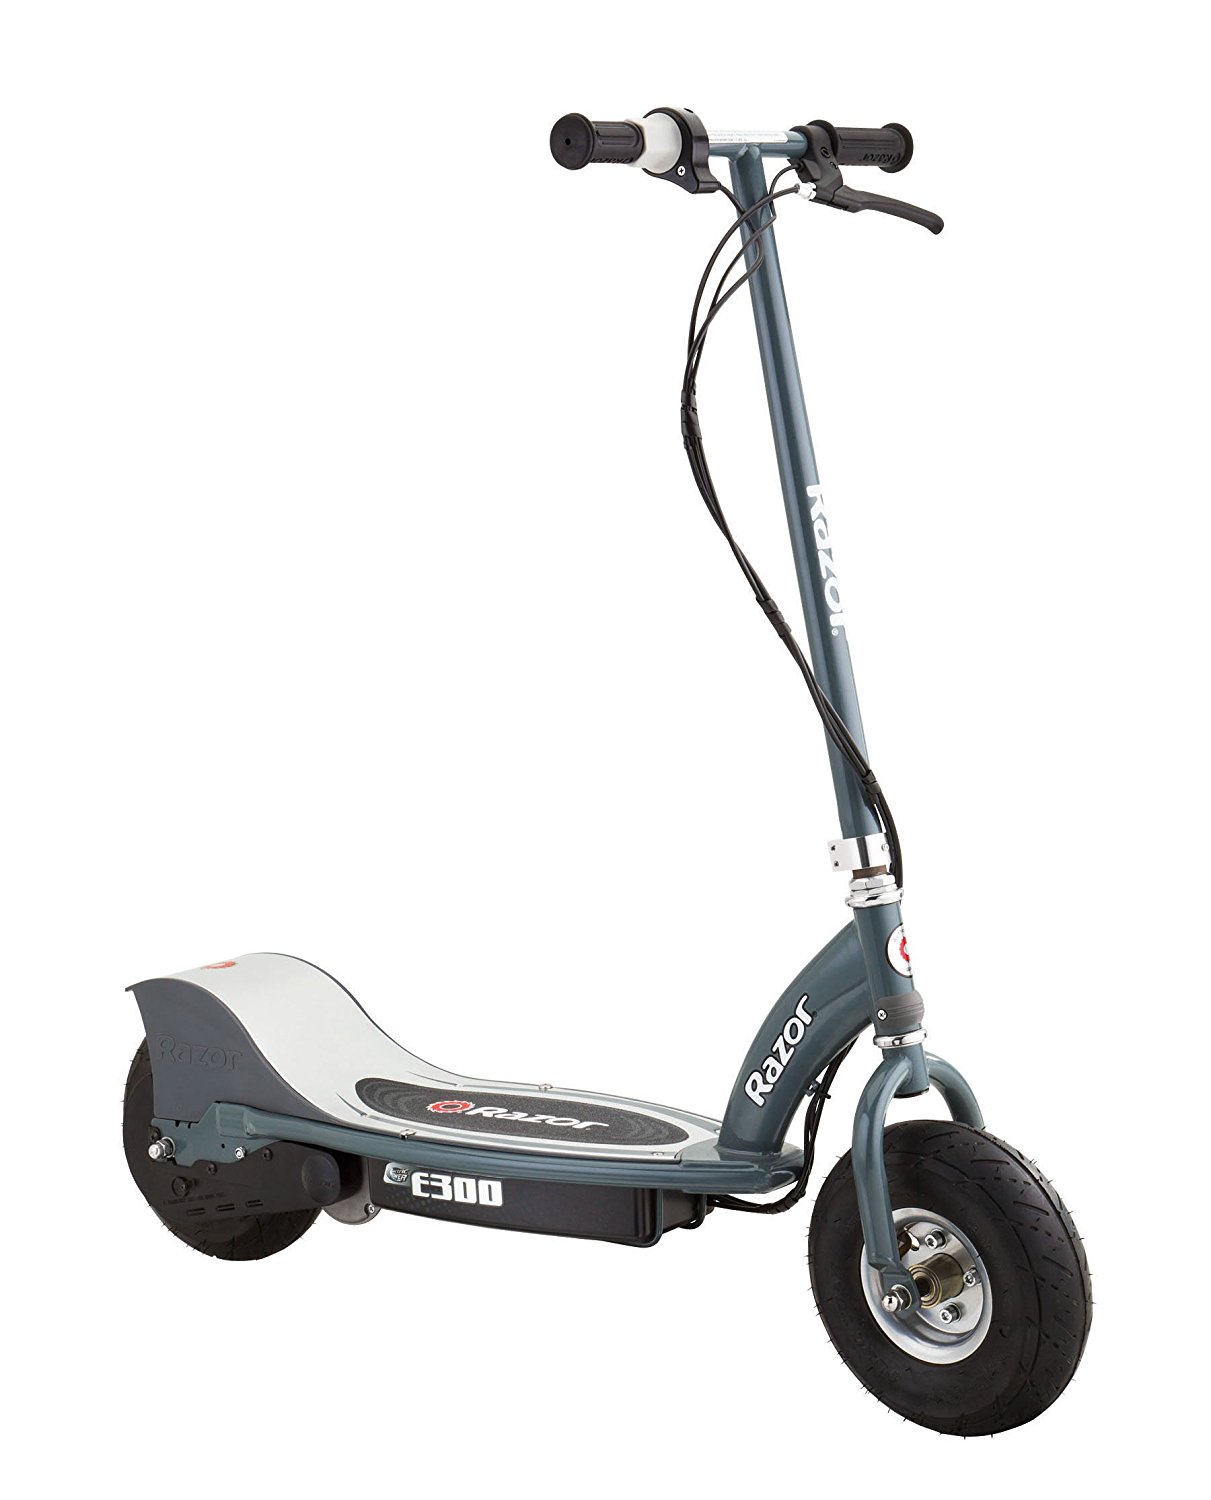 Xrazor E300 Electric Scooter .pagespeed.ic.RrOEDucIvW 